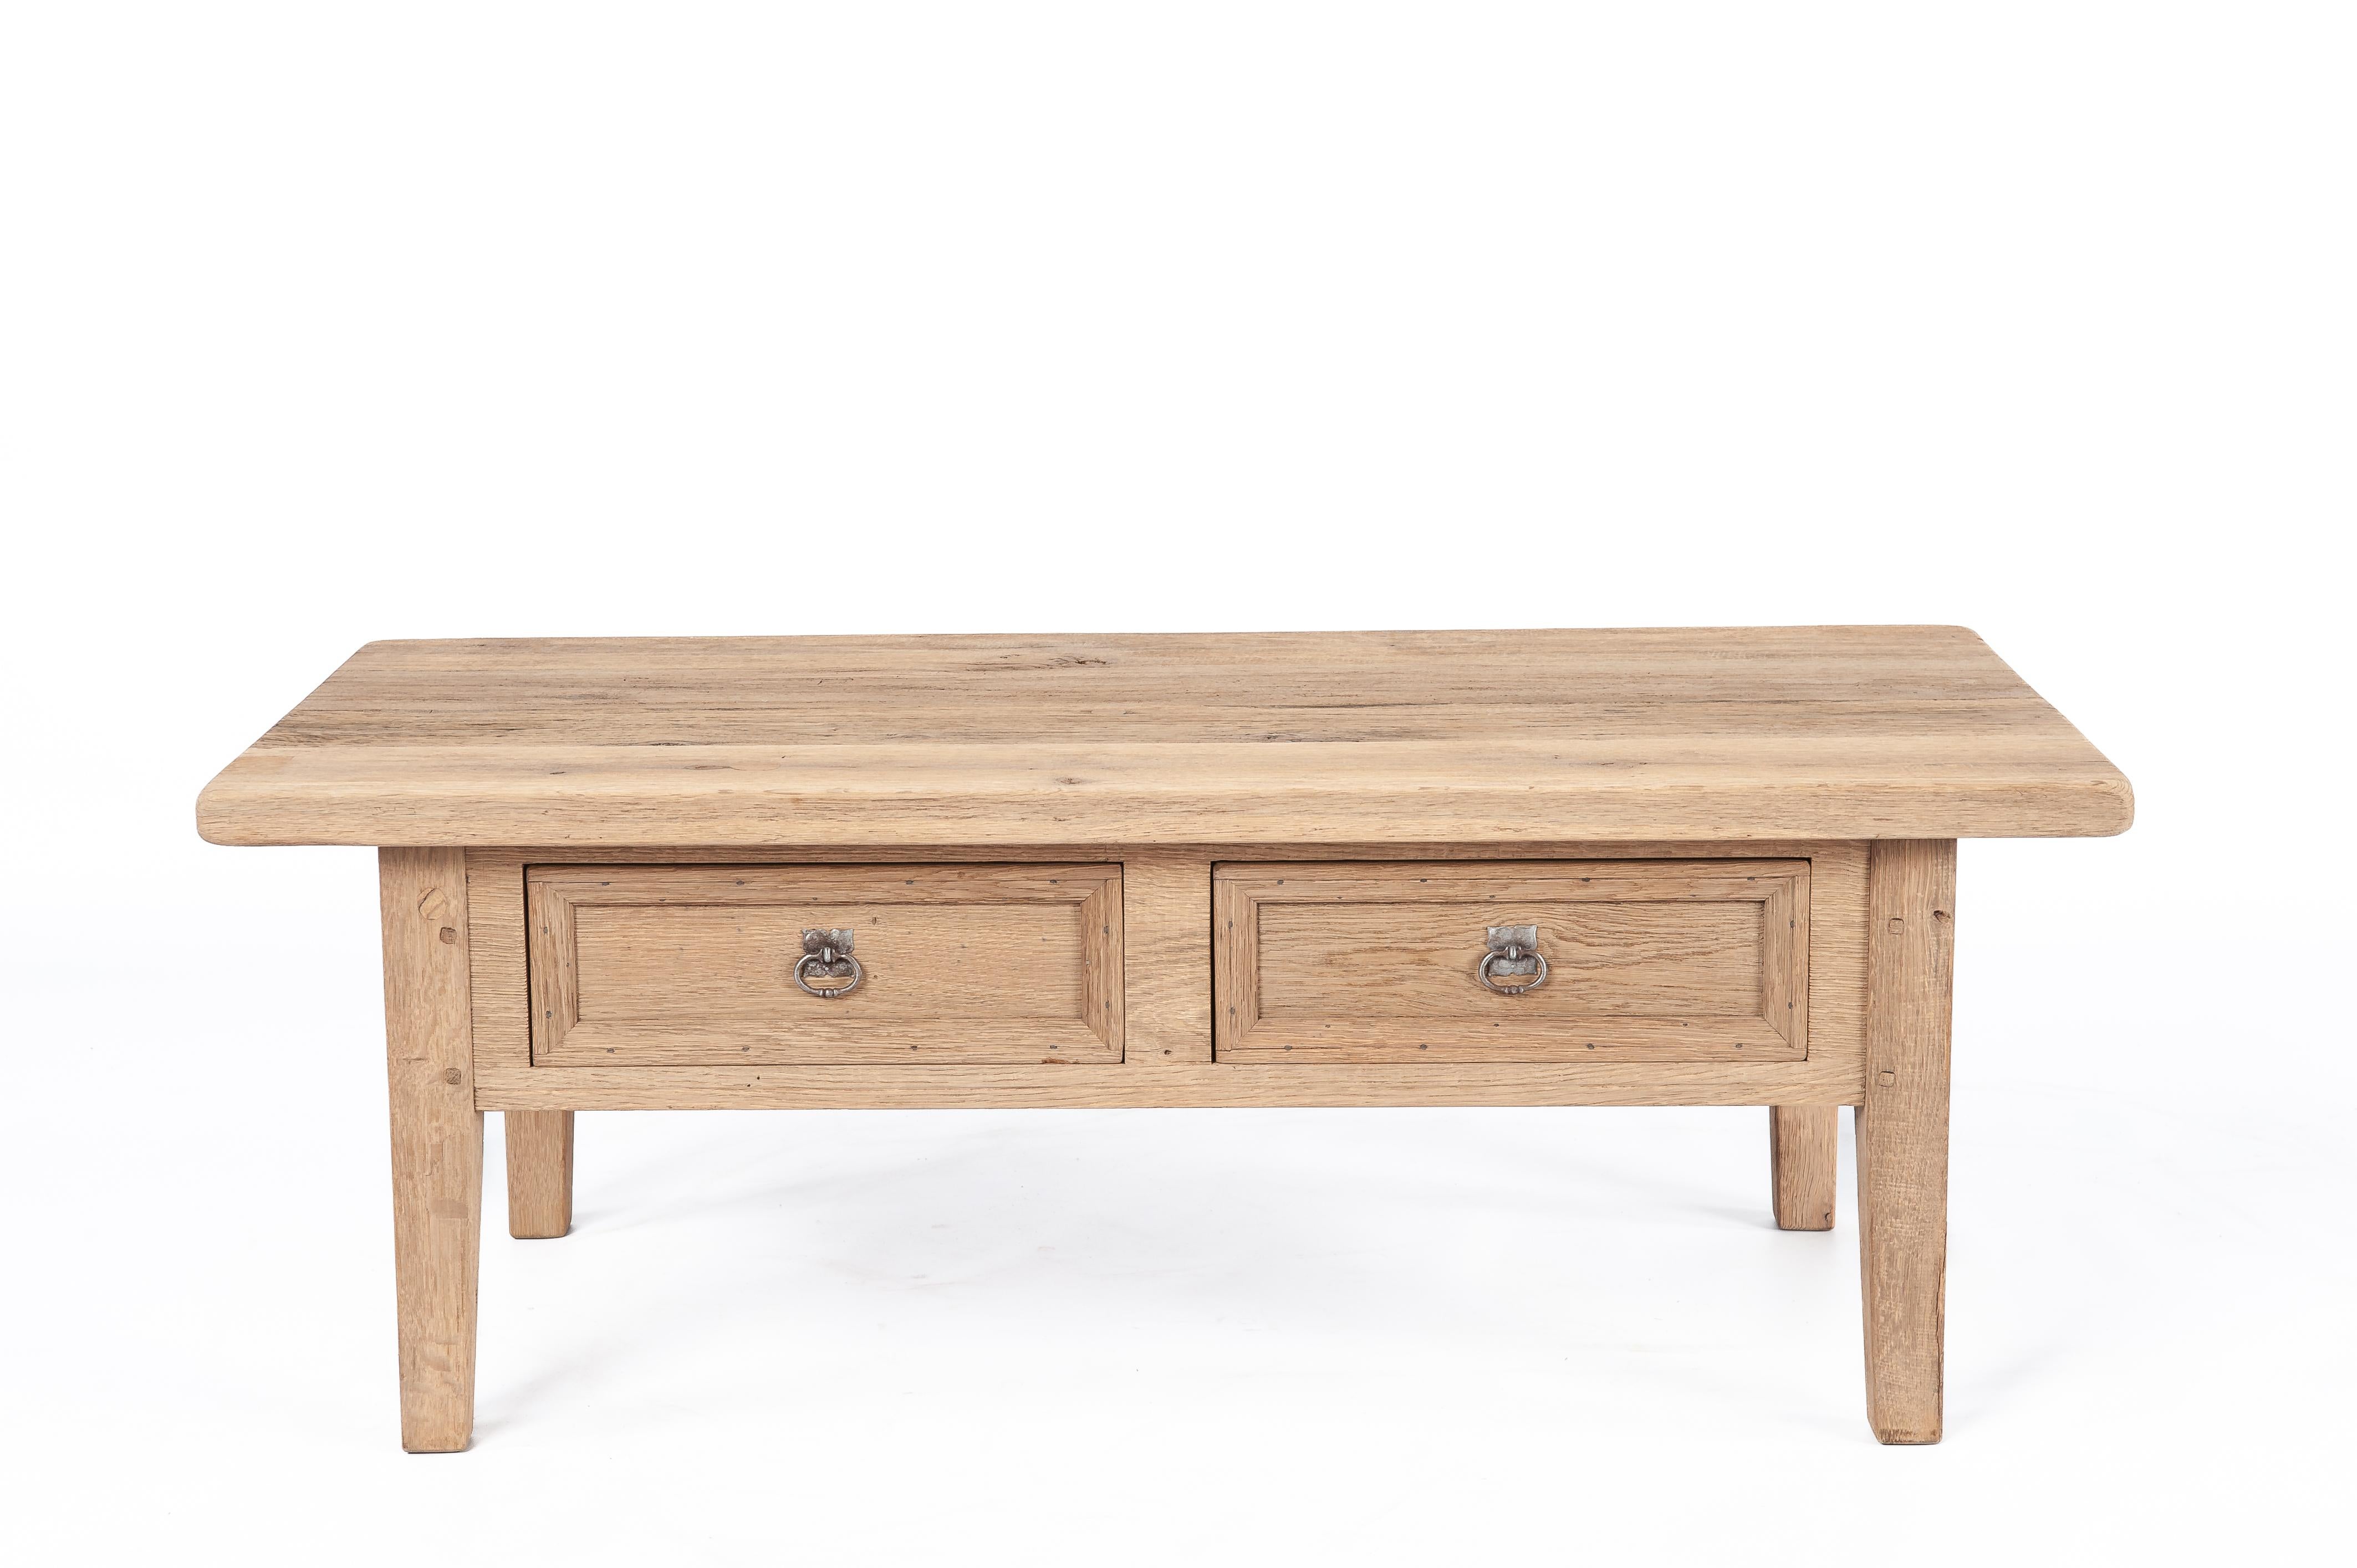 This is a timeless vintage coffee table, traditionally crafted from reclaimed oak wood dating back to the 1960s. This rustic piece was built by the esteemed Piet Rombouts & Sons furniture workshop, a legacy proudly continued by our family. The wood